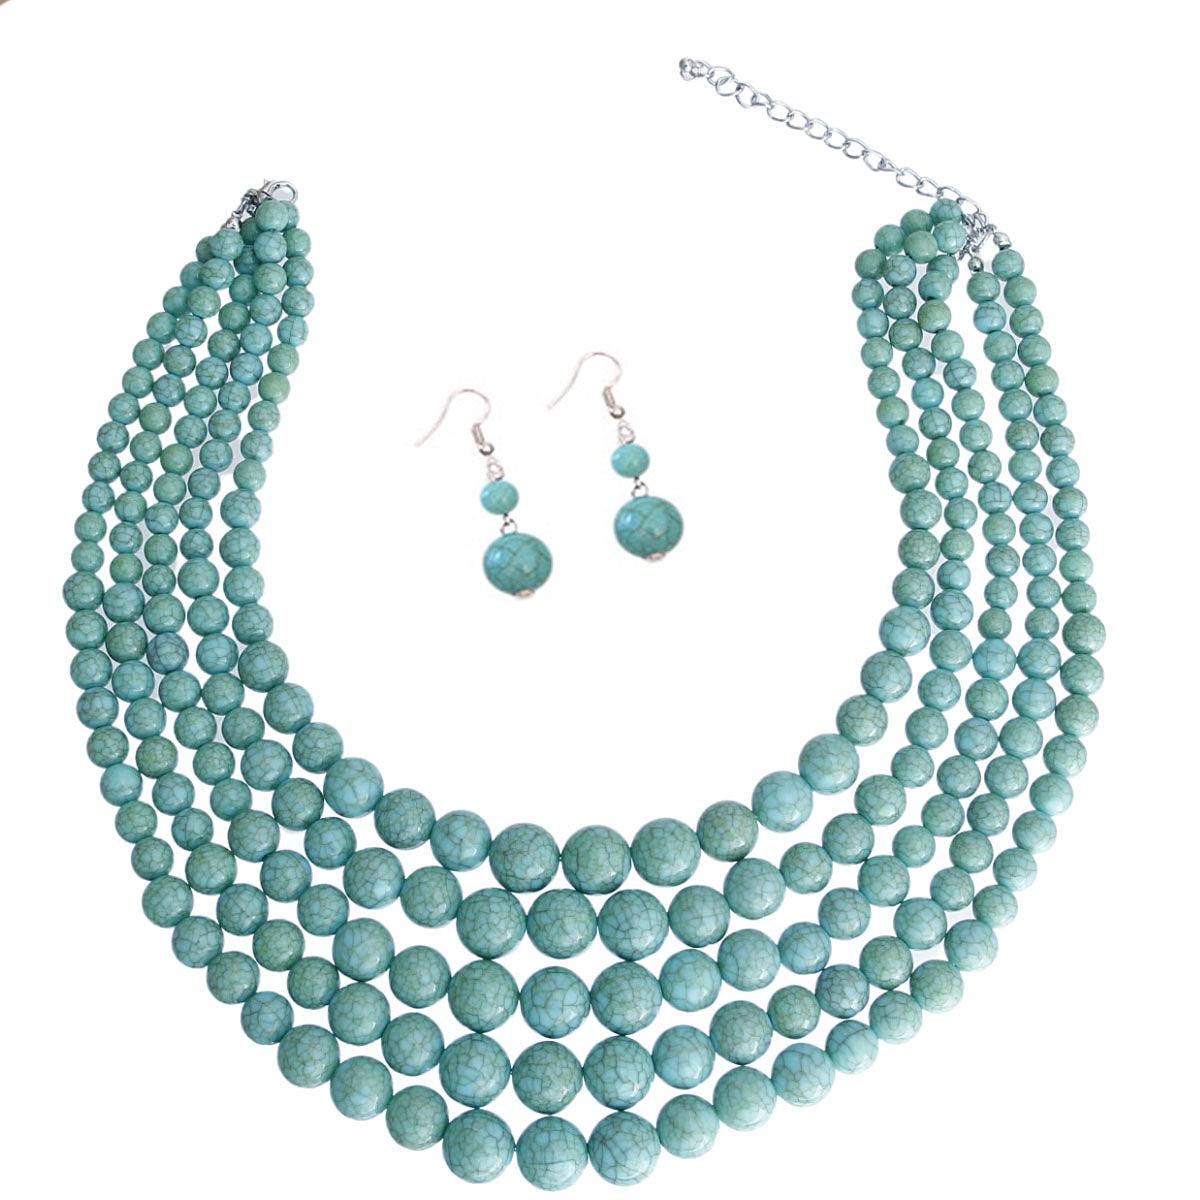 Turquoise Stone-simulated Pearl Beads Necklace Earrings Set